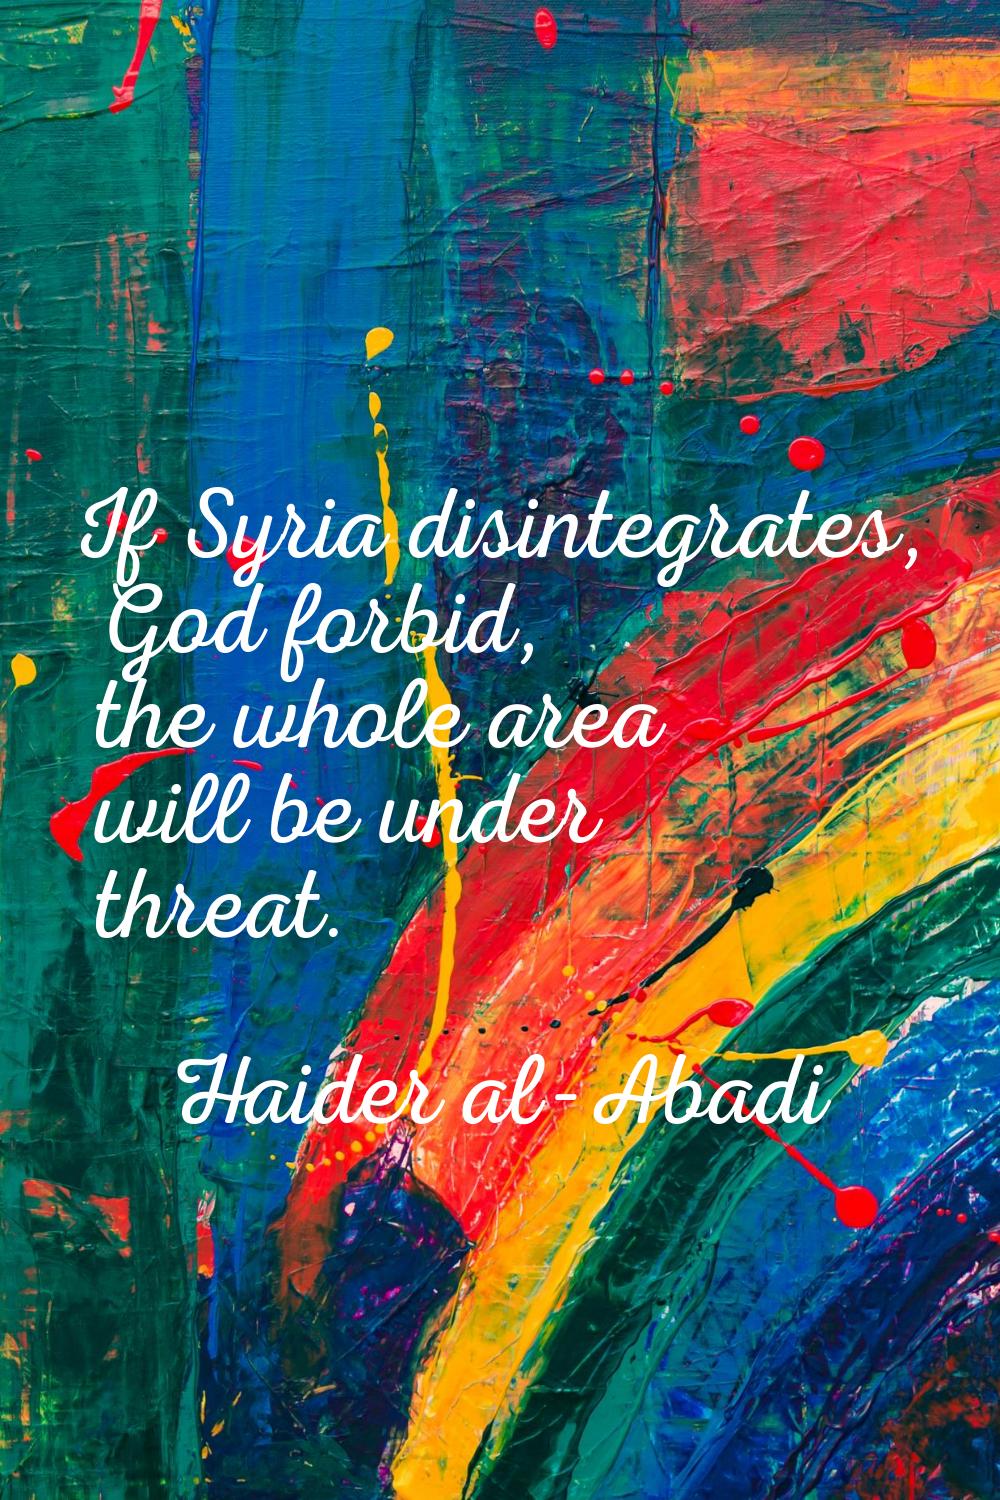 If Syria disintegrates, God forbid, the whole area will be under threat.